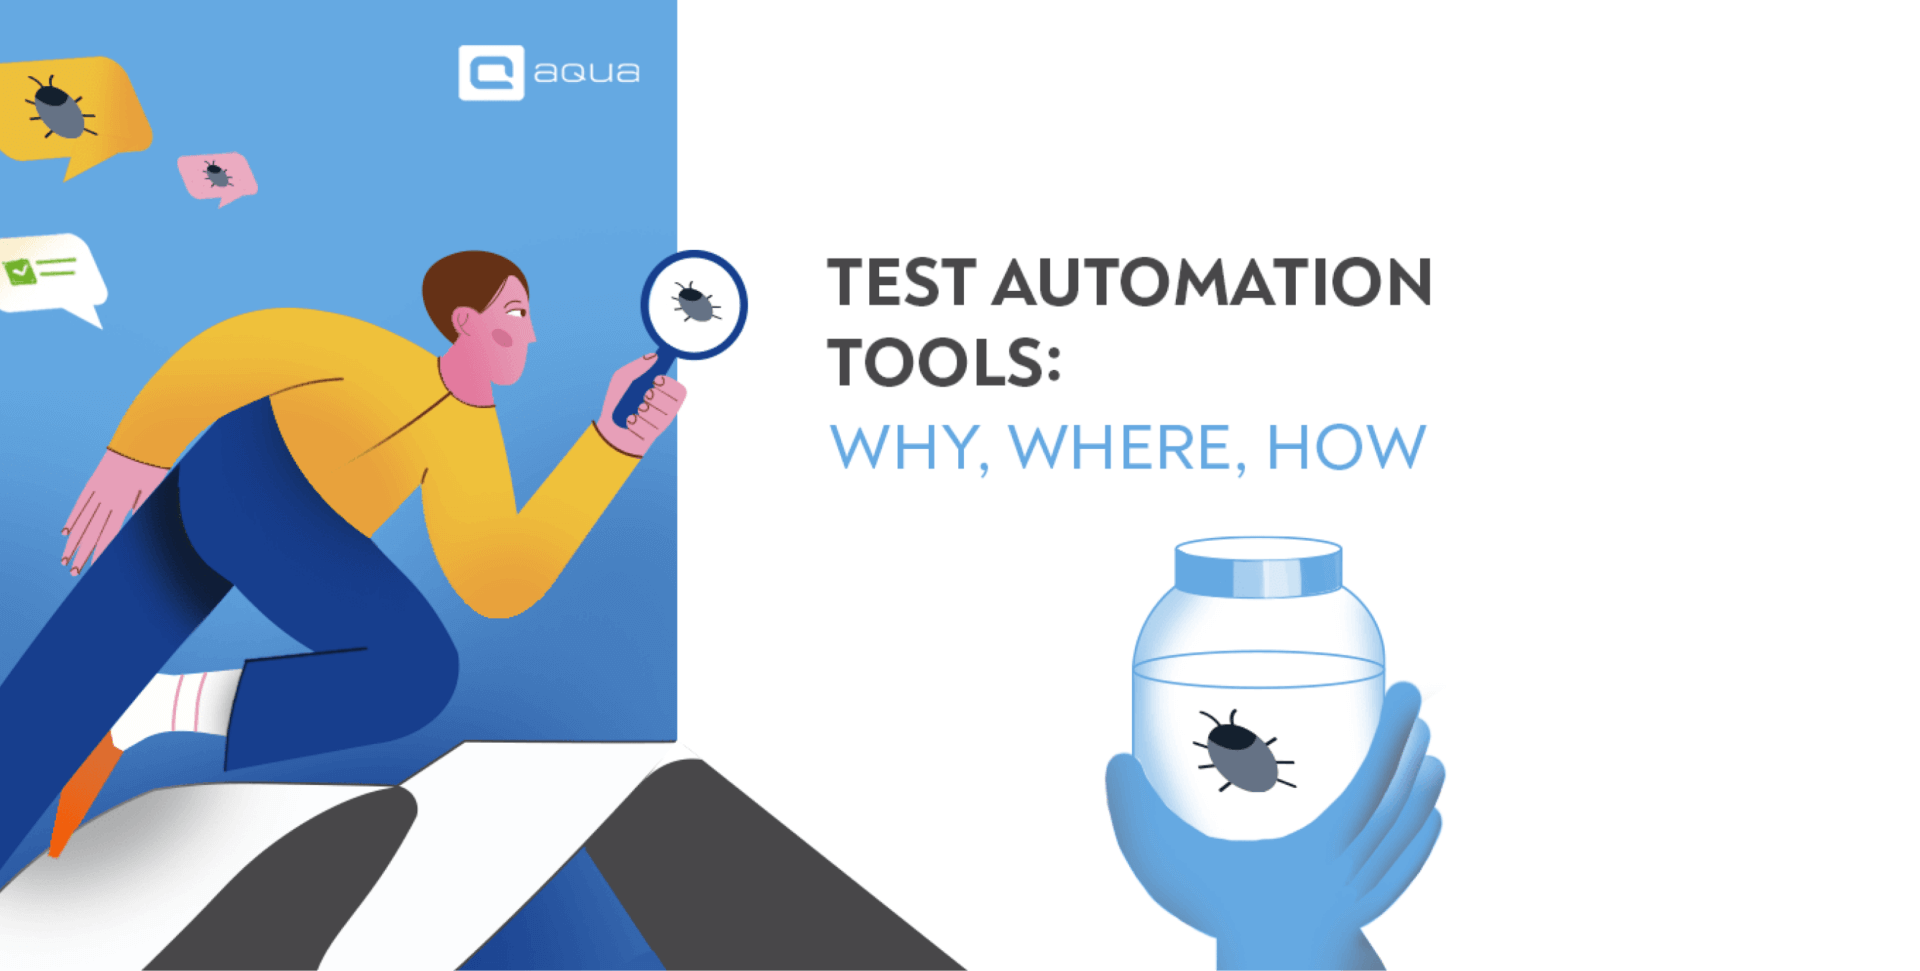 Test automation tools: why, where, how